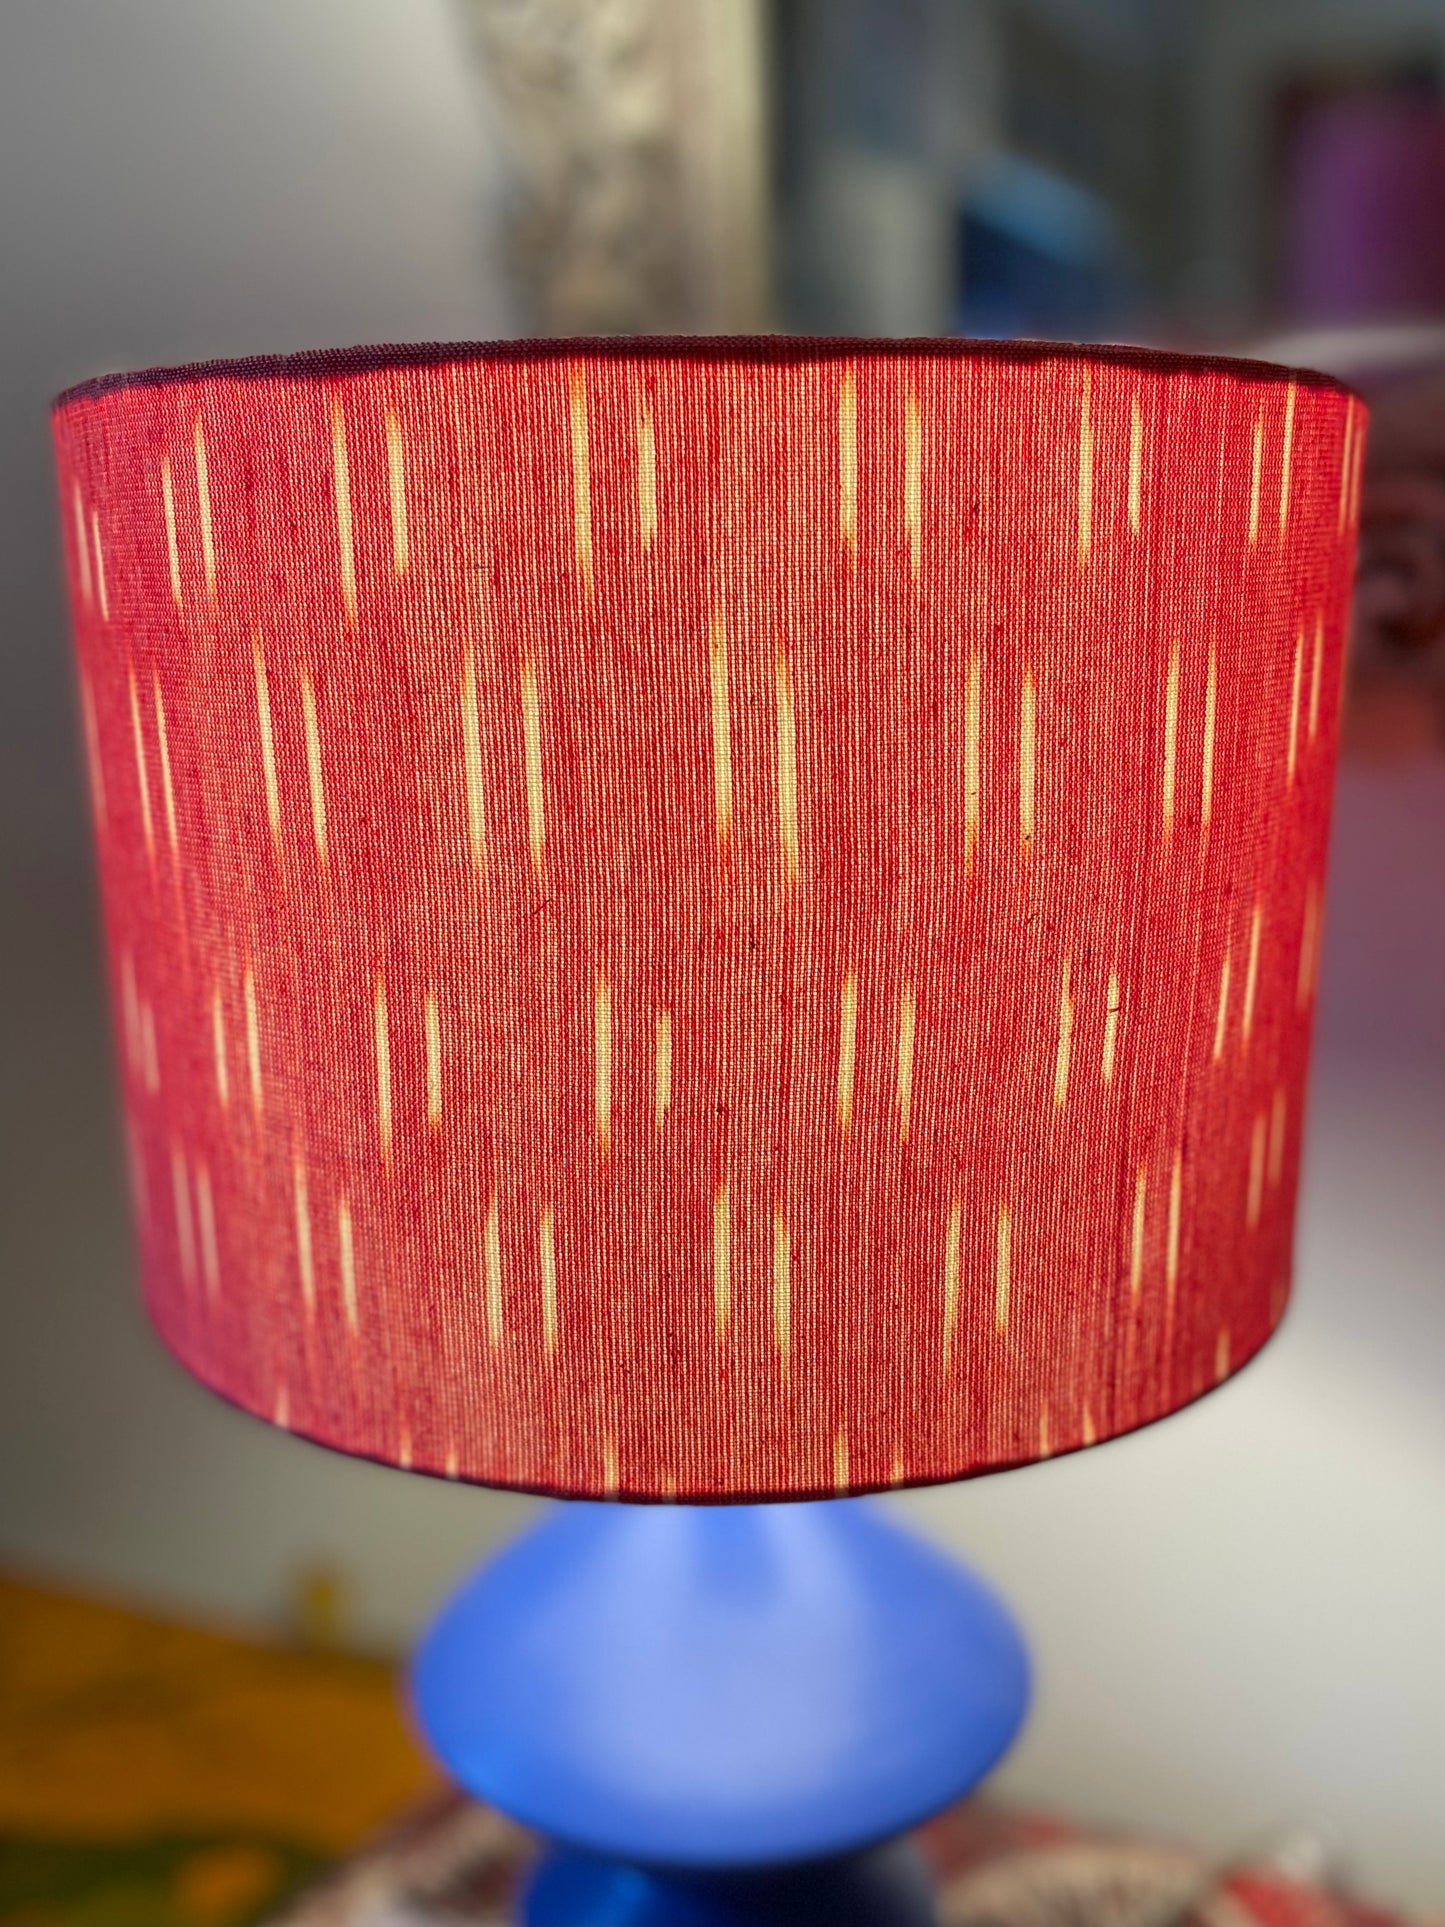 10 inch Drum Lampshade. Indian Pochampally Ikat Weave Cotton Fabric. Persimmon and Ecru.